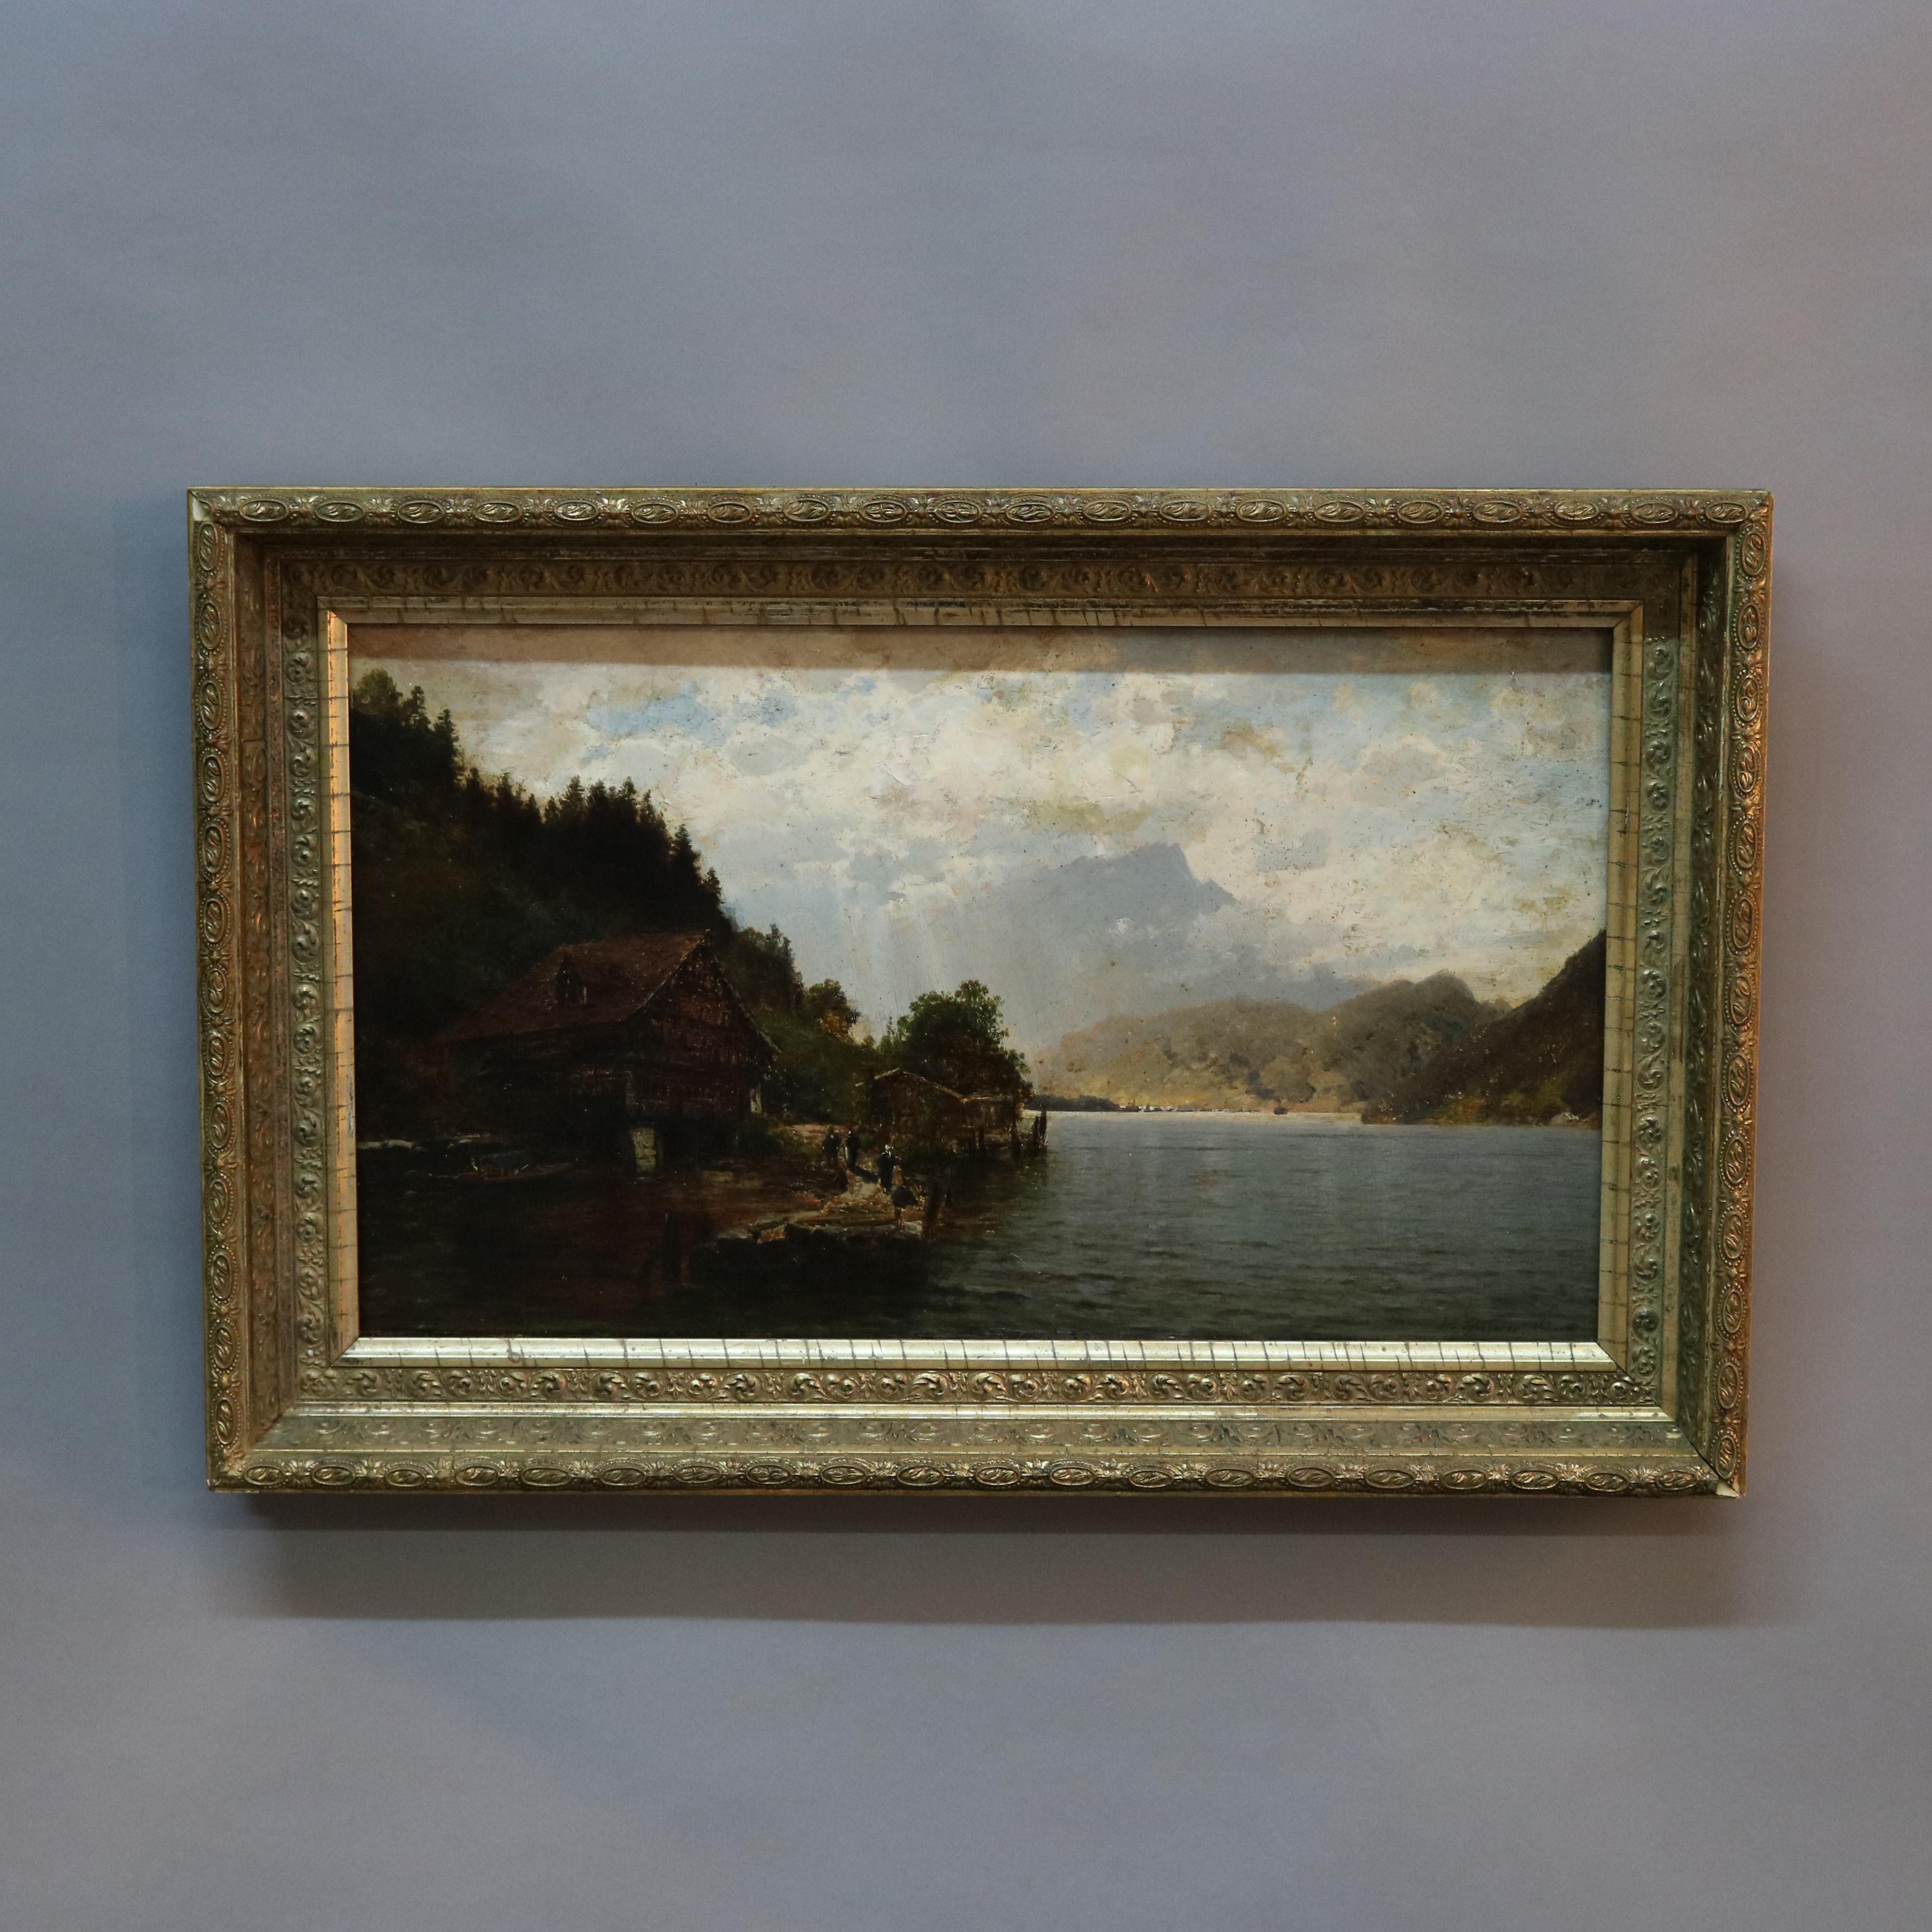 German Antique Landscape Painting of Lake by Josef Schoyerer, 19th C